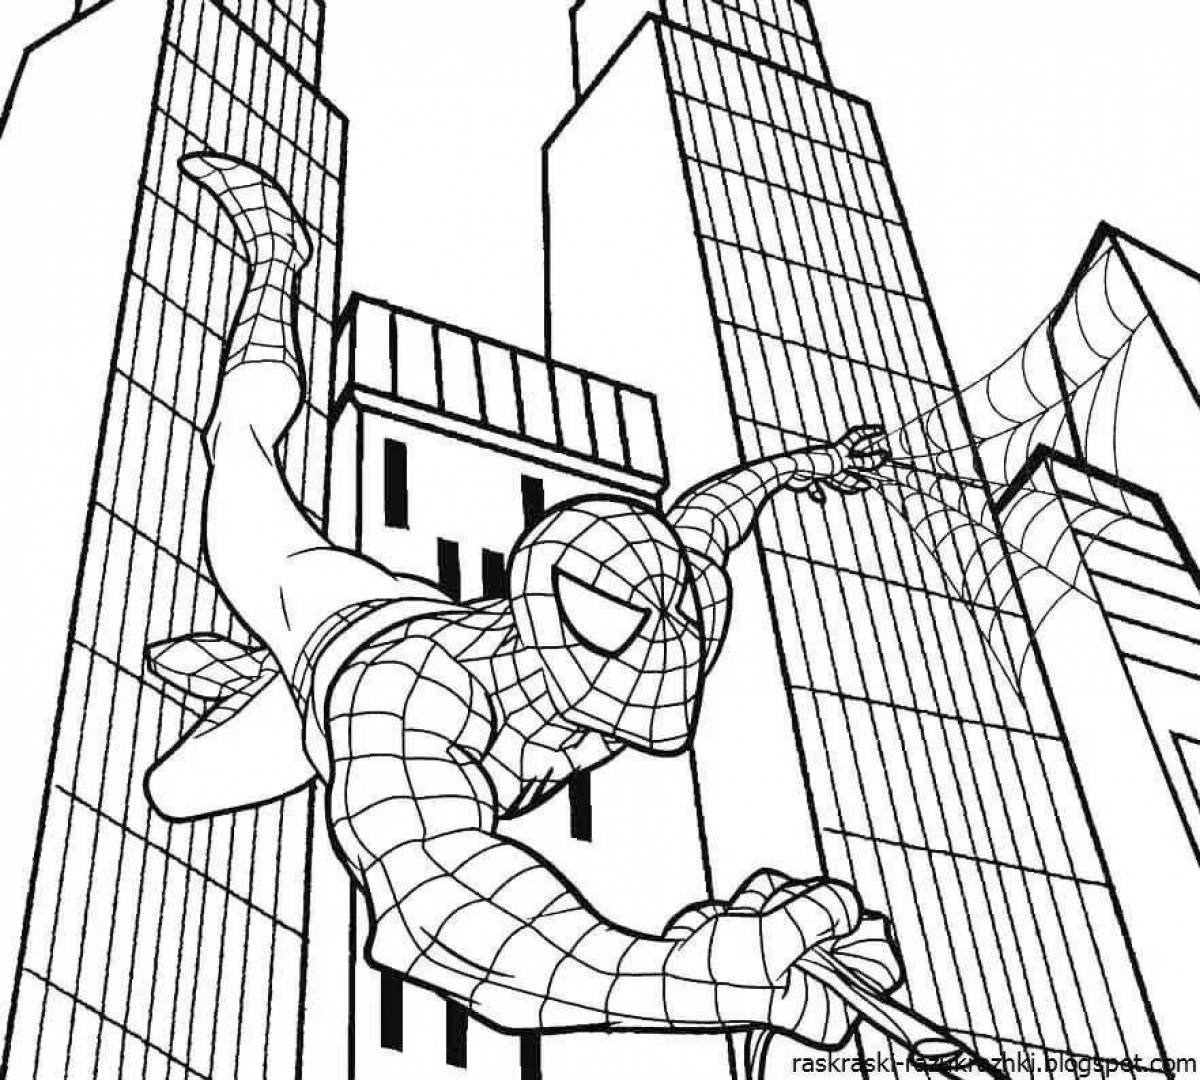 Animated spiderman coloring game